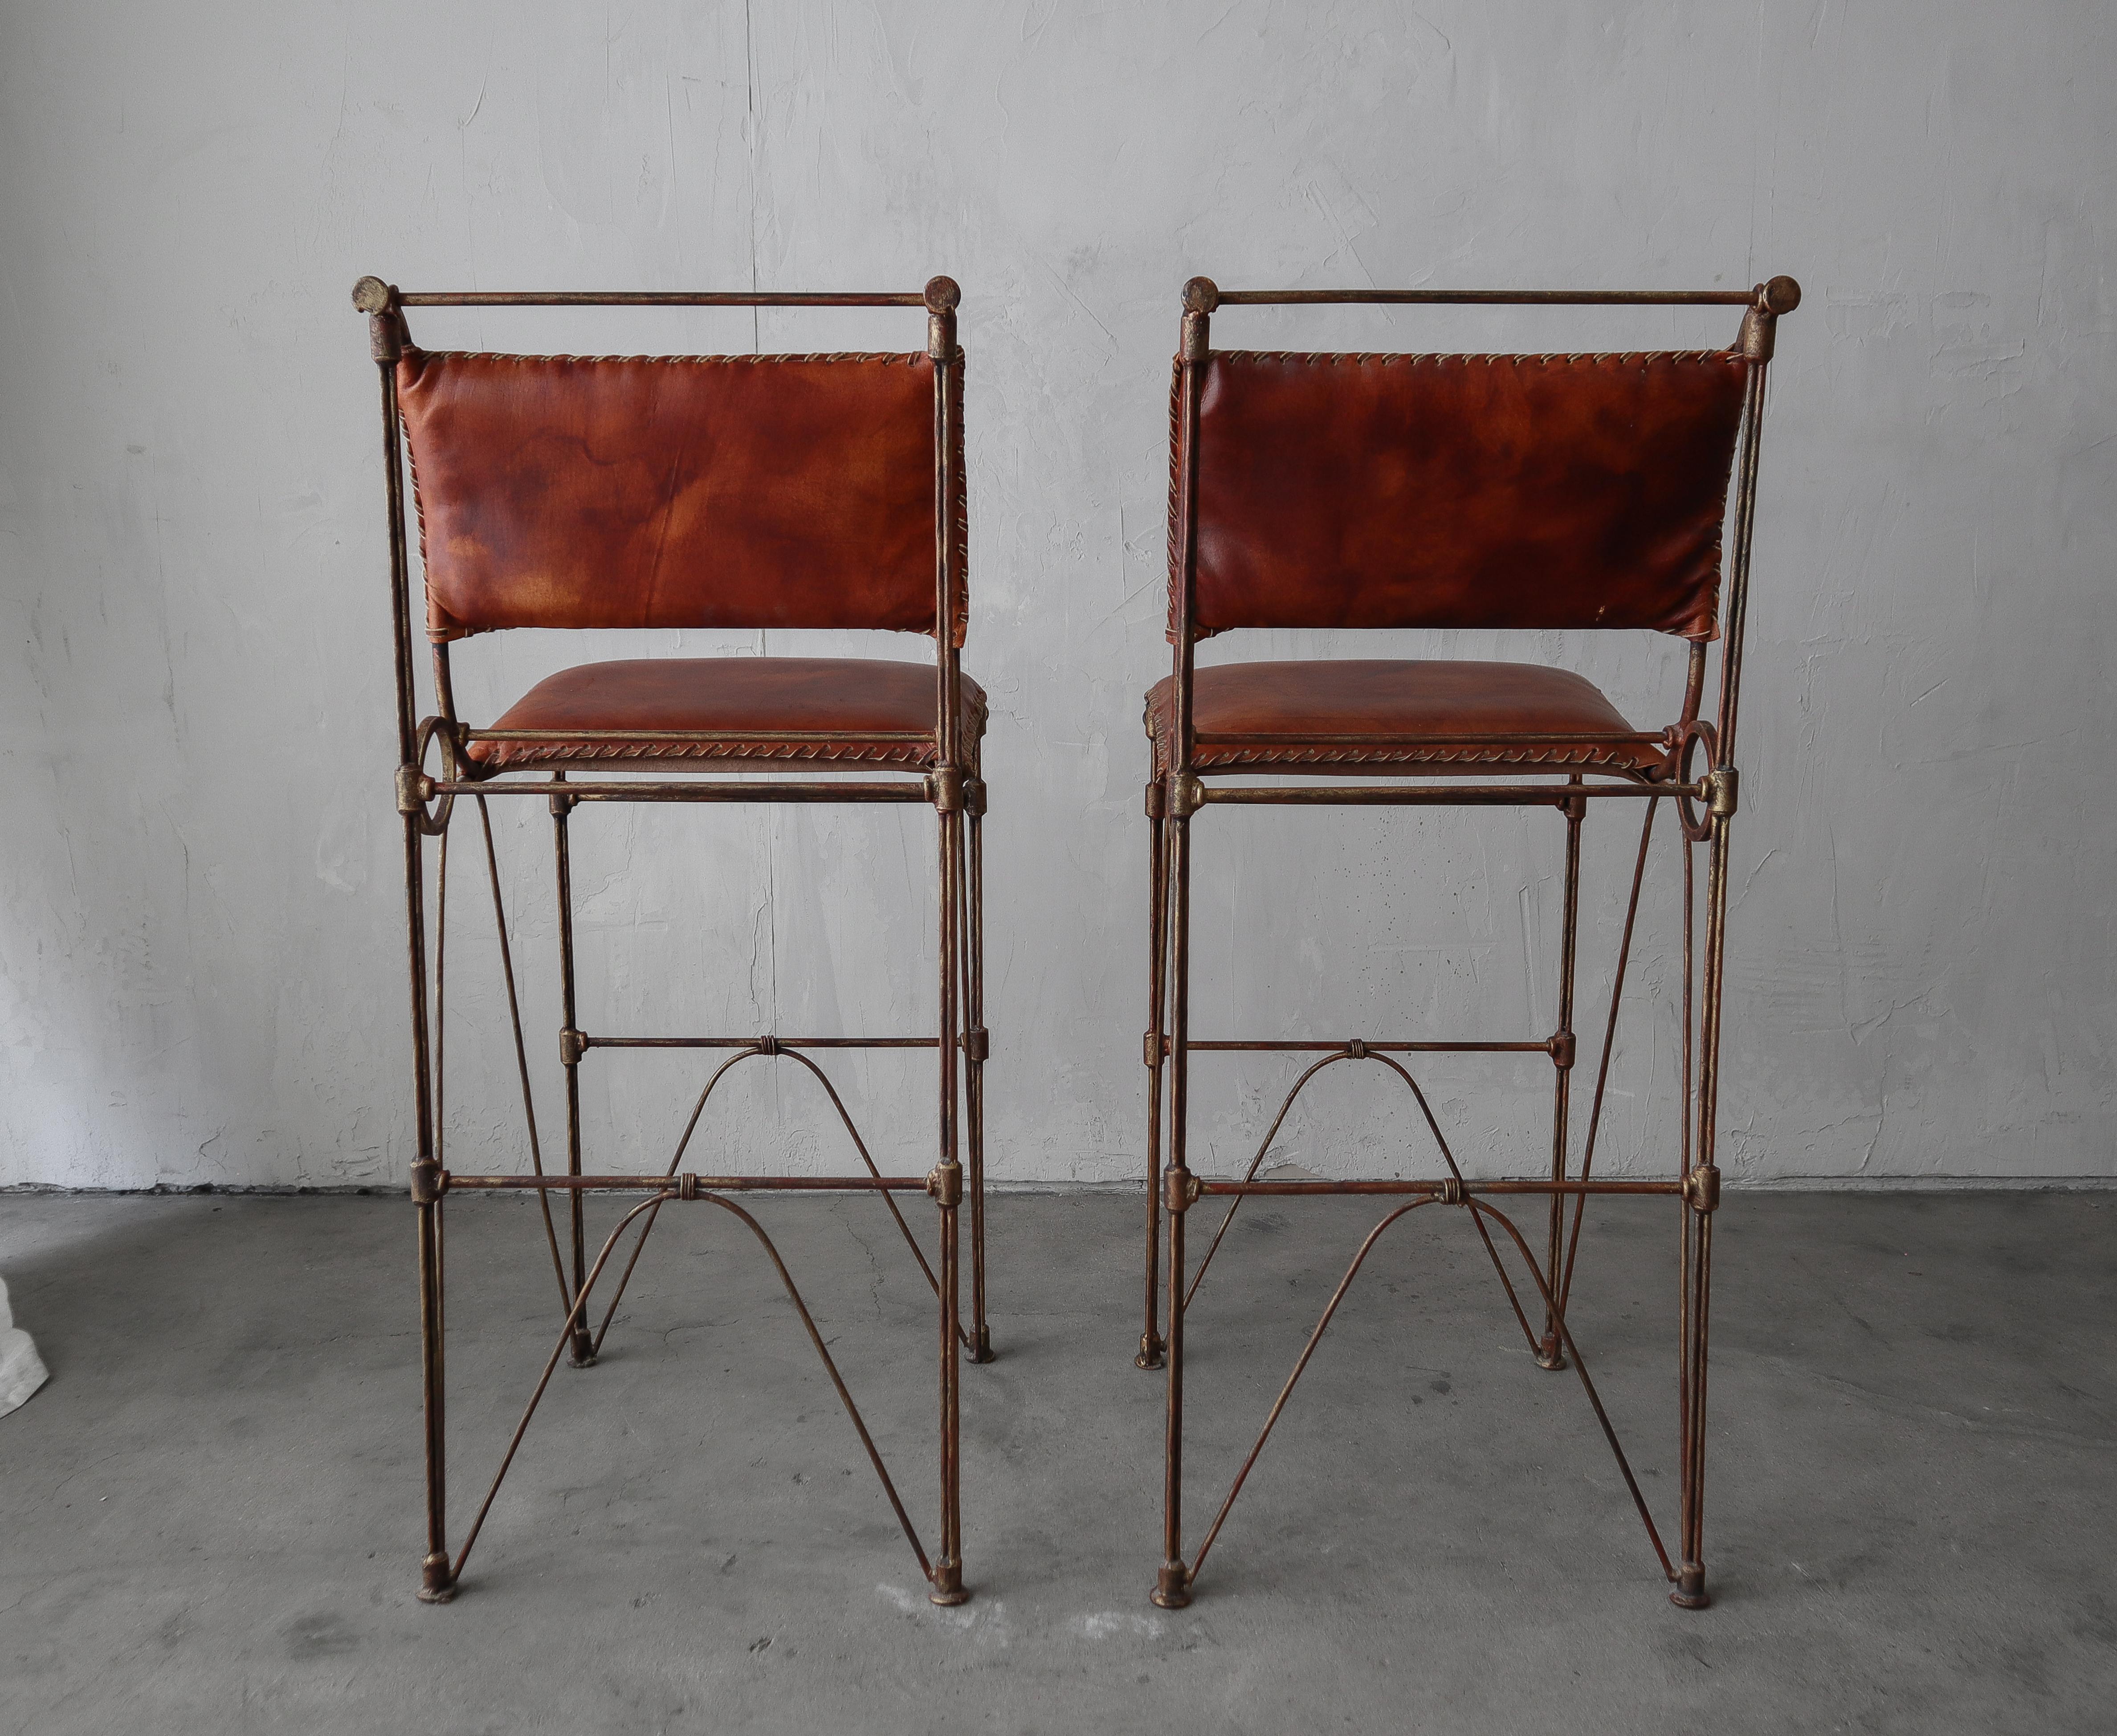 Rustic Pair of Leather Bar Stools by Ilana Goor In Good Condition For Sale In Las Vegas, NV